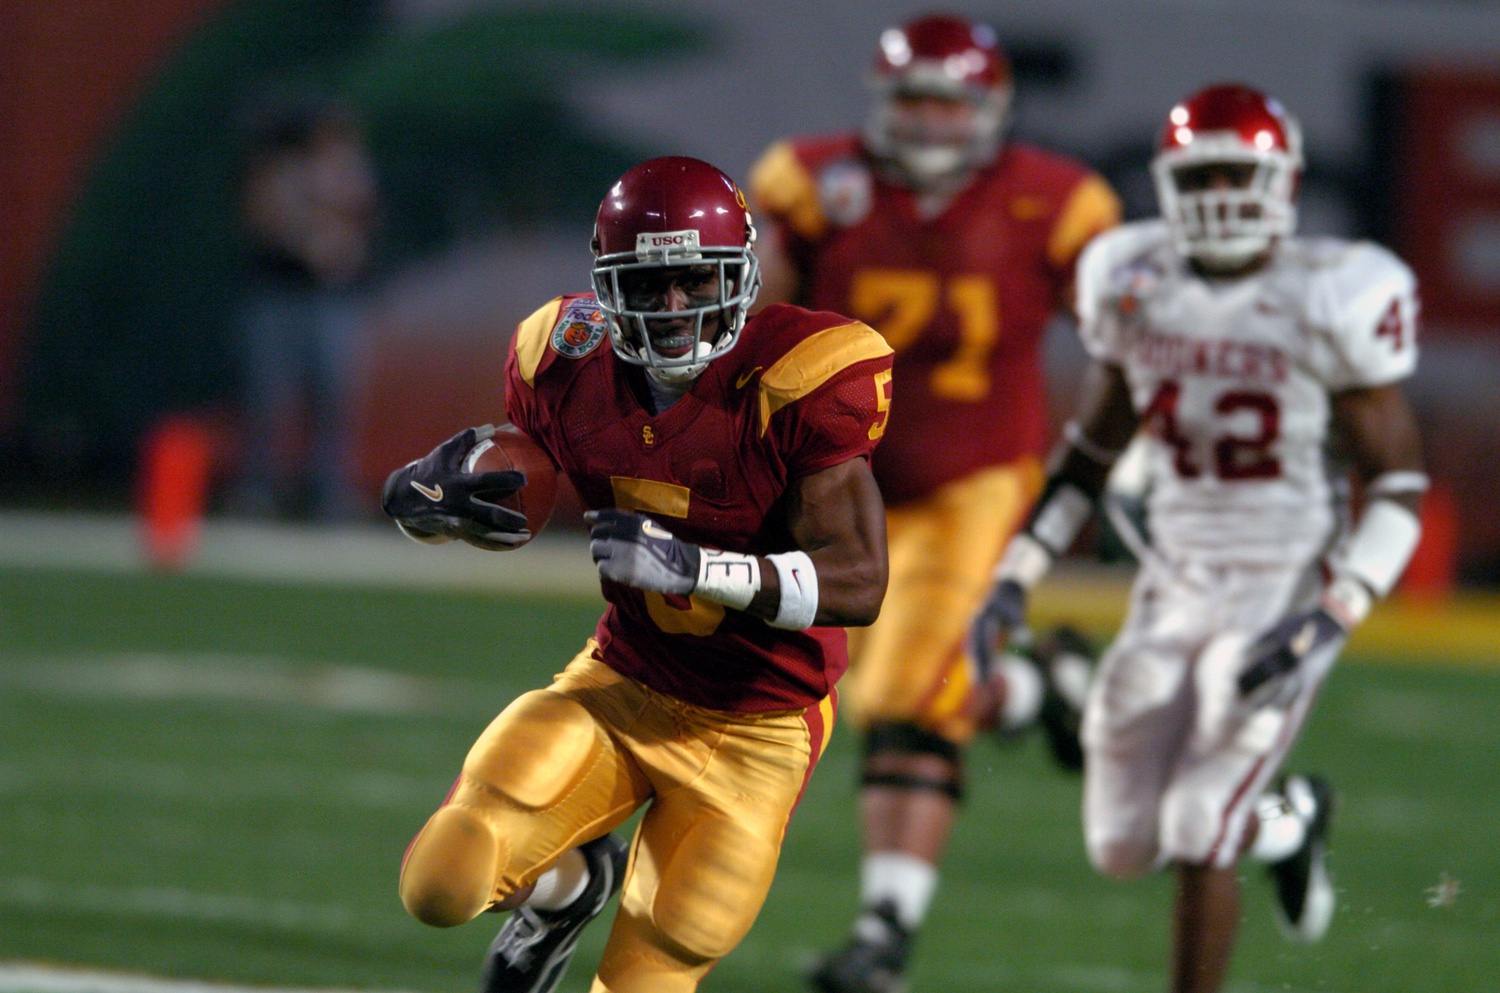 Reggie Bush heads up field on the first play form scrimmage in a 55-19 victory over Oklahoma in the FedEx Orange Bowl.